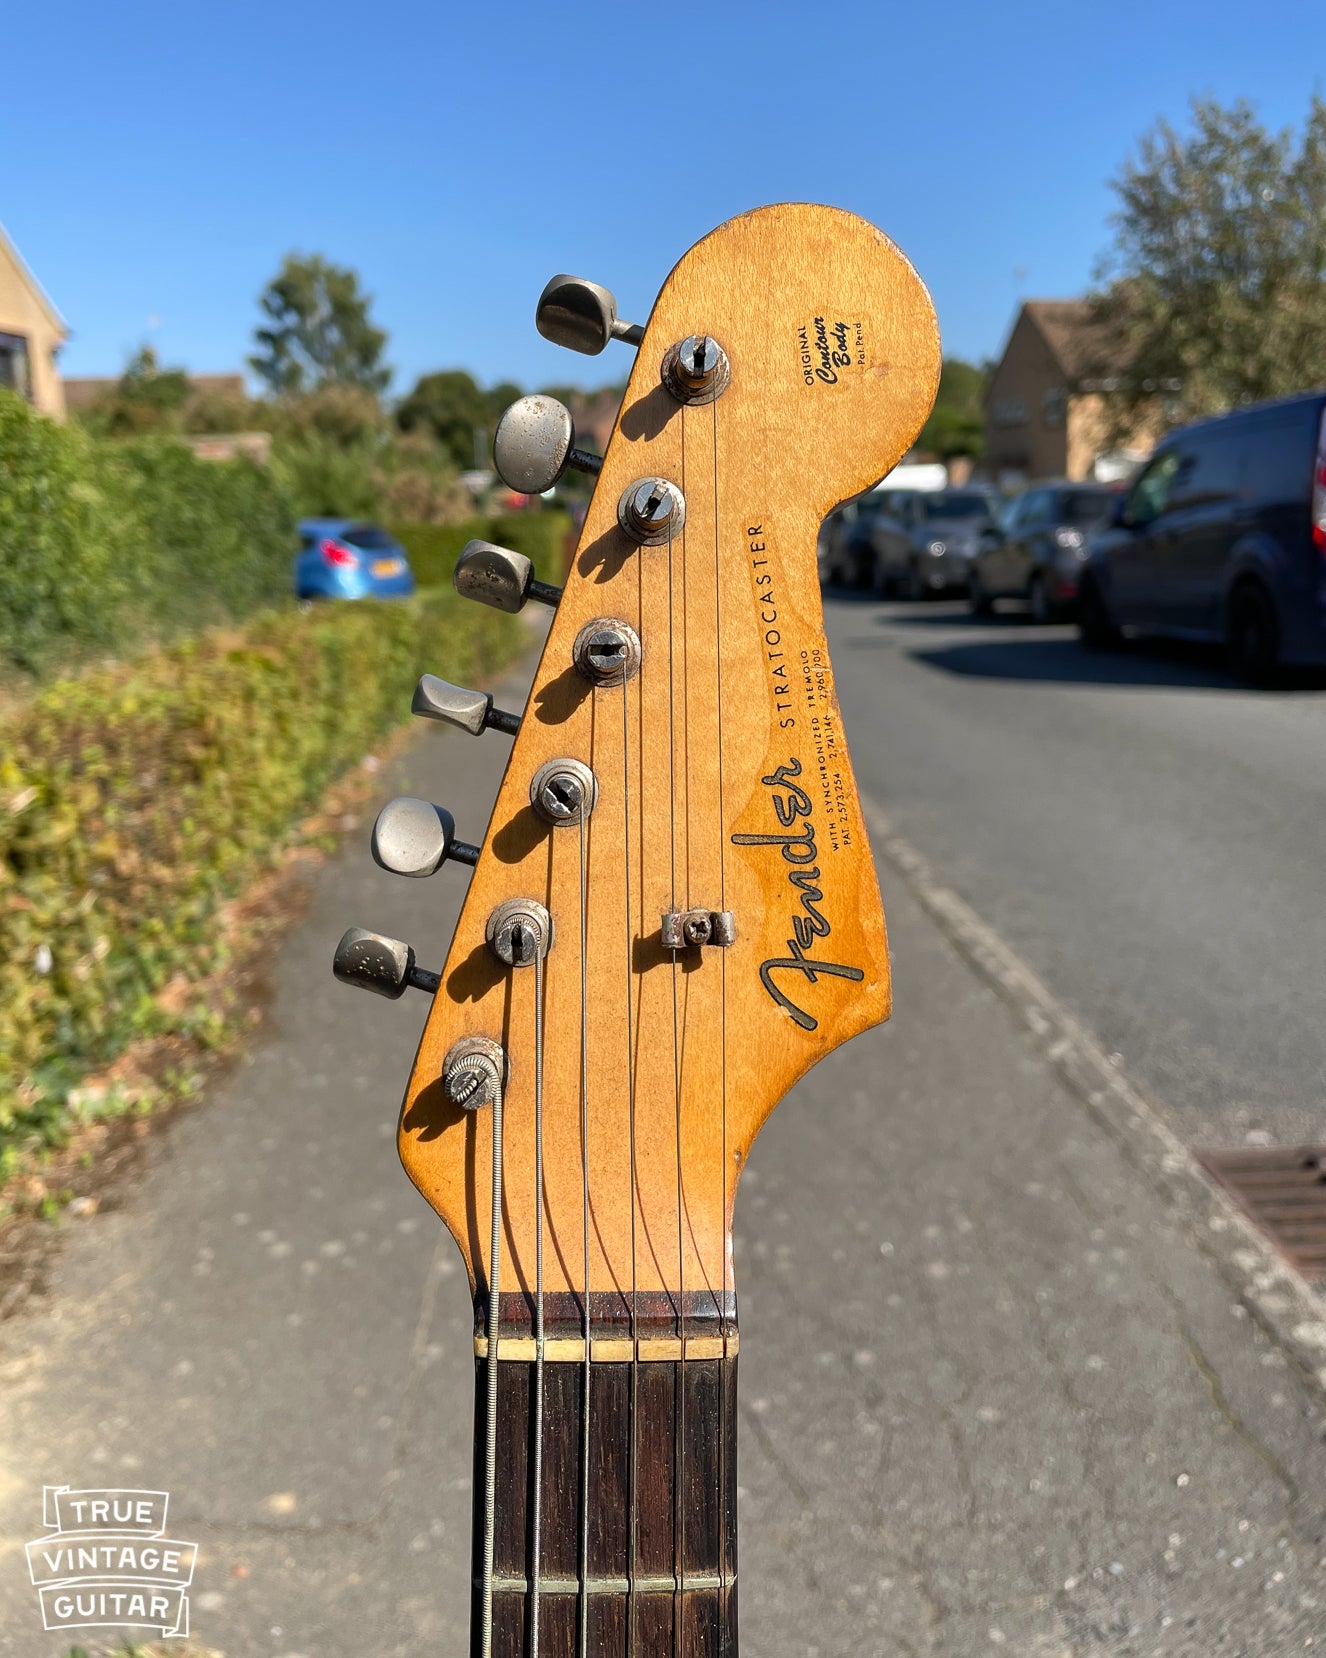 1962 Stratocaster with spaghetti style Fender logo